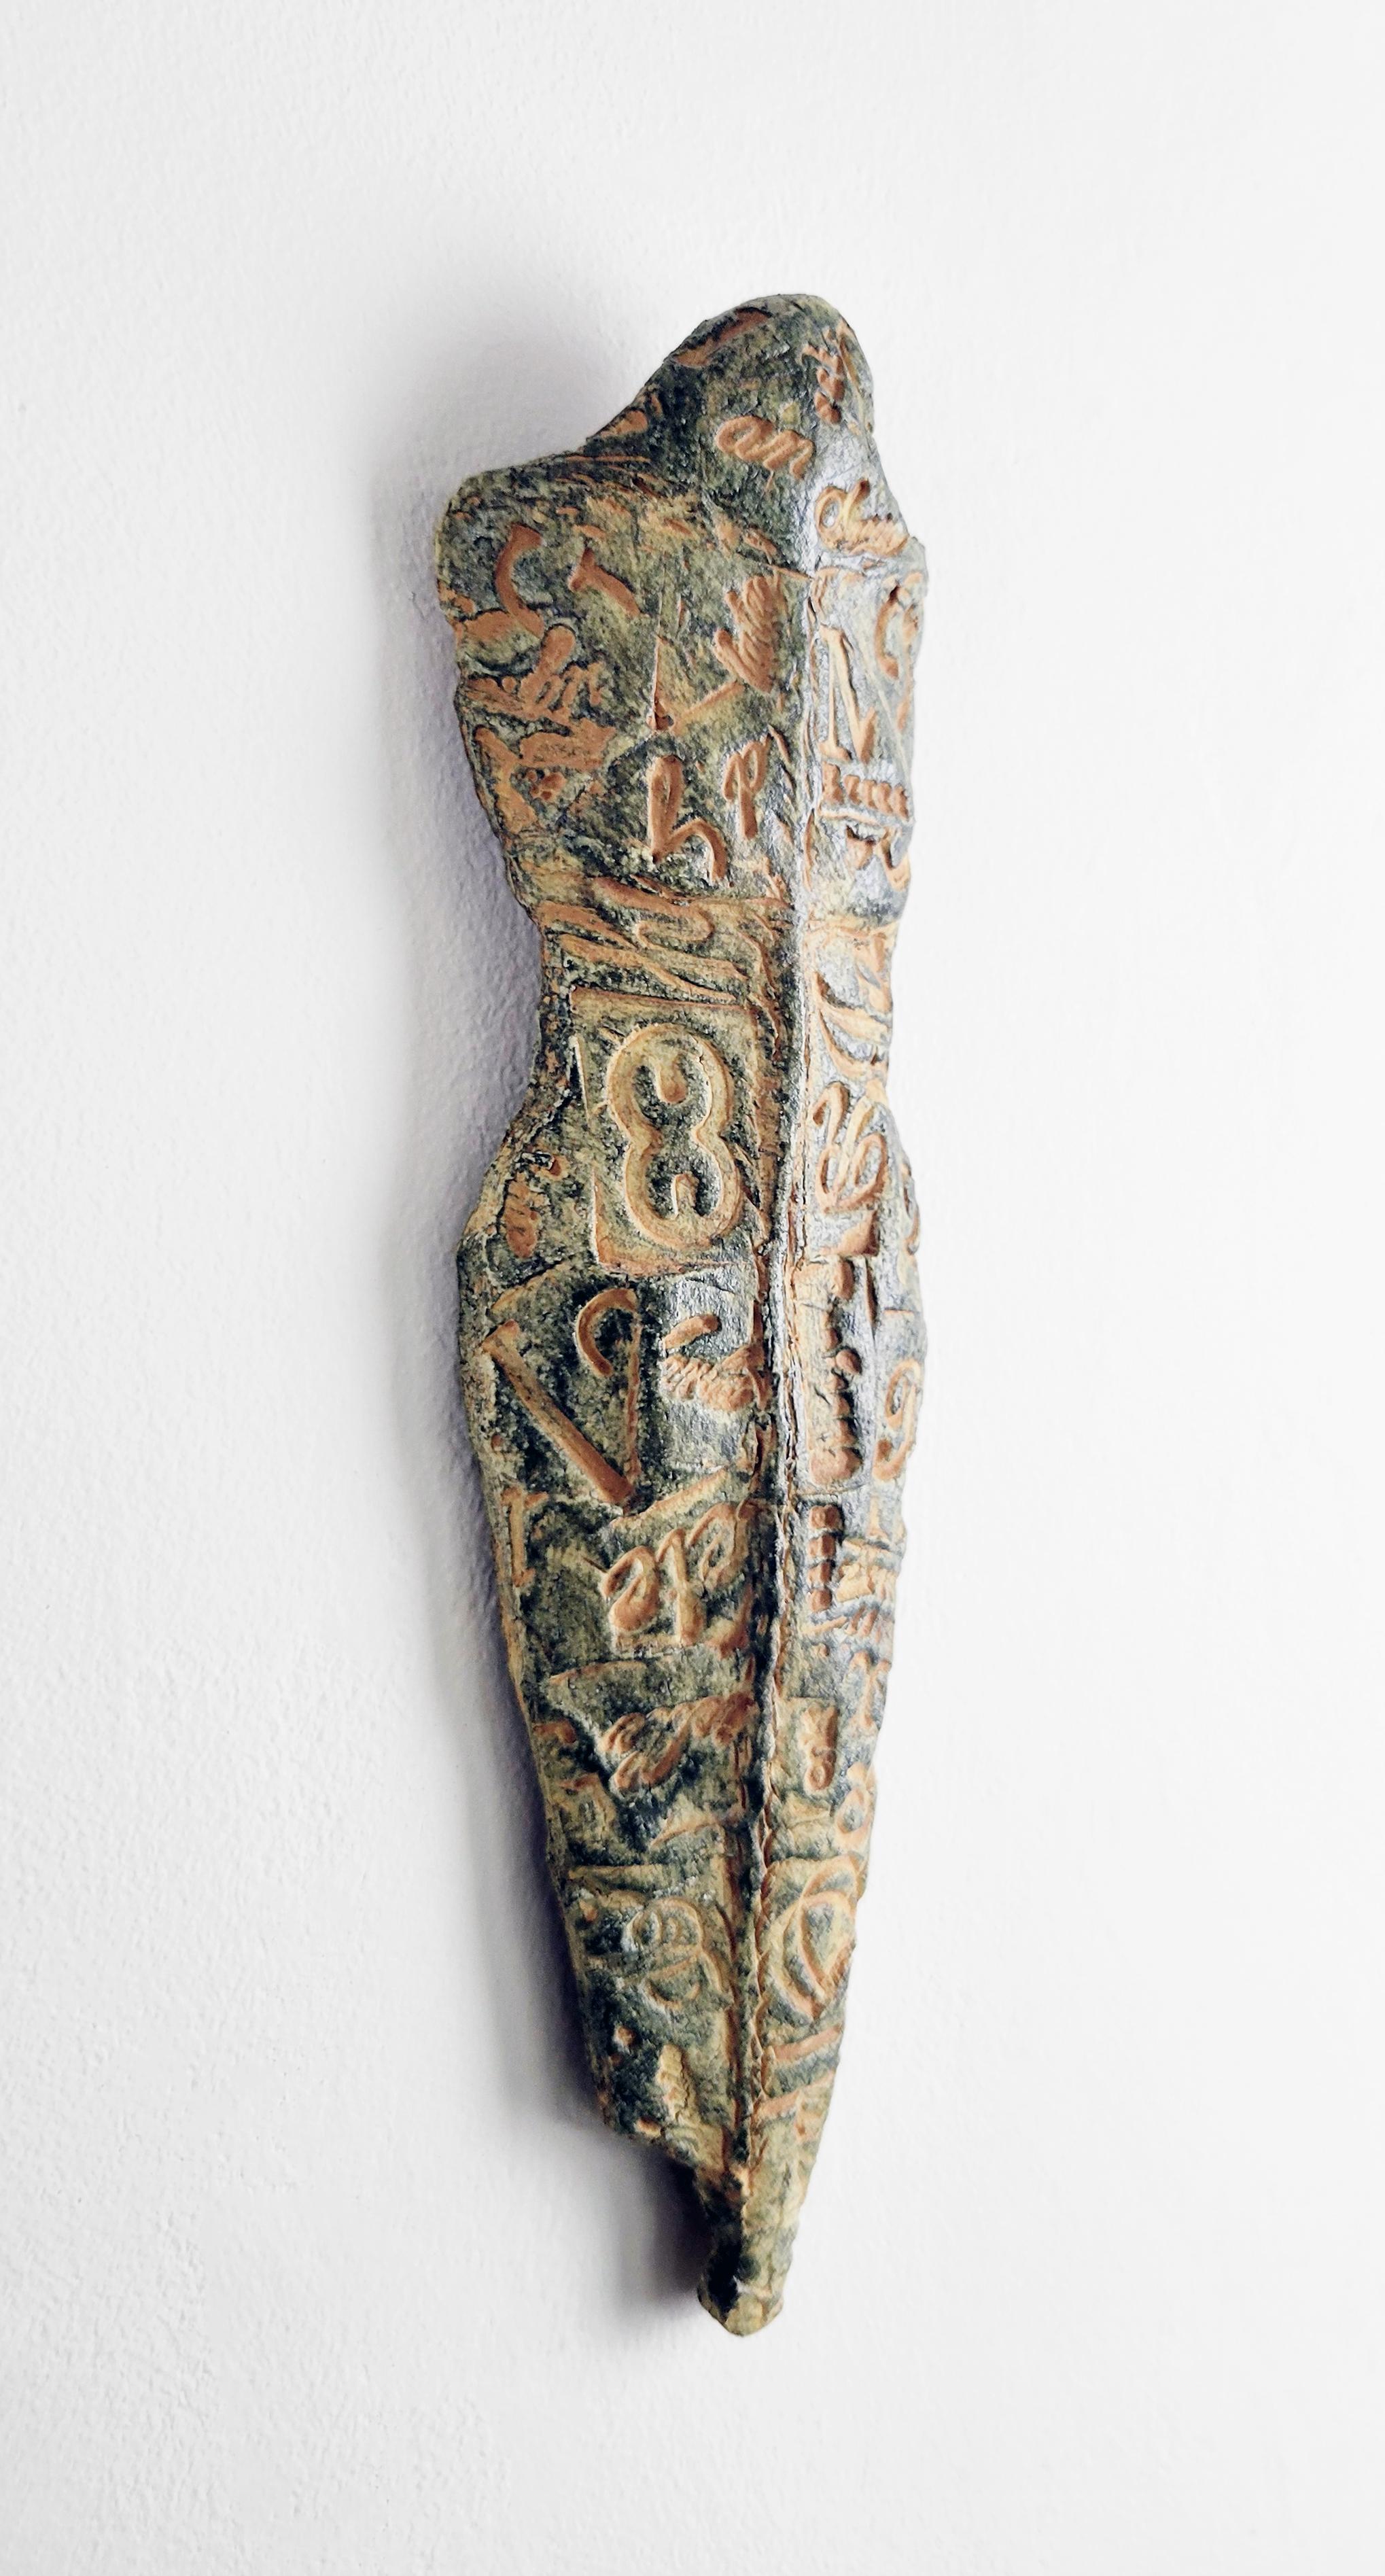 Linda Stein, Iron Knight 625 - Contemporary Art Ceramic Wall Sculpture

Iron Knight 625 is from Linda Stein’s Knights of Protection series, which she started after being forced to evacuate her New York downtown studio for a year post-9/11.  Stein's